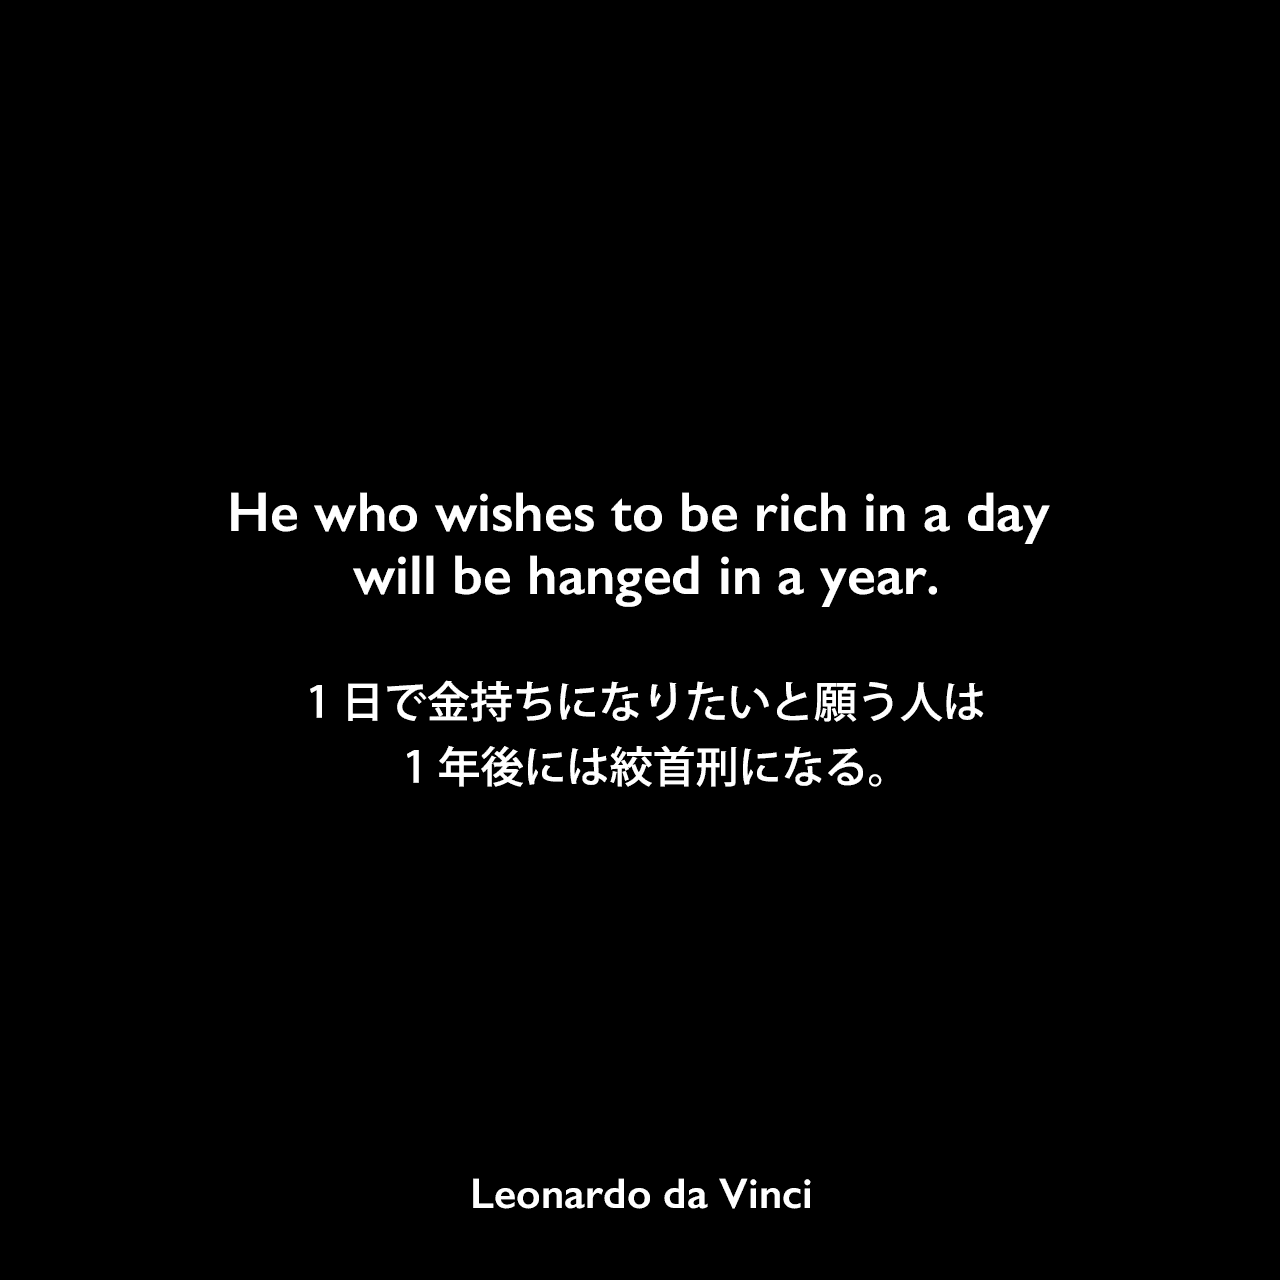 He who wishes to be rich in a day will be hanged in a year.1日で金持ちになりたいと願う人は、1年後には絞首刑になる。- レオナルド・ダ・ヴィンチのノートよりLeonardo da Vinci